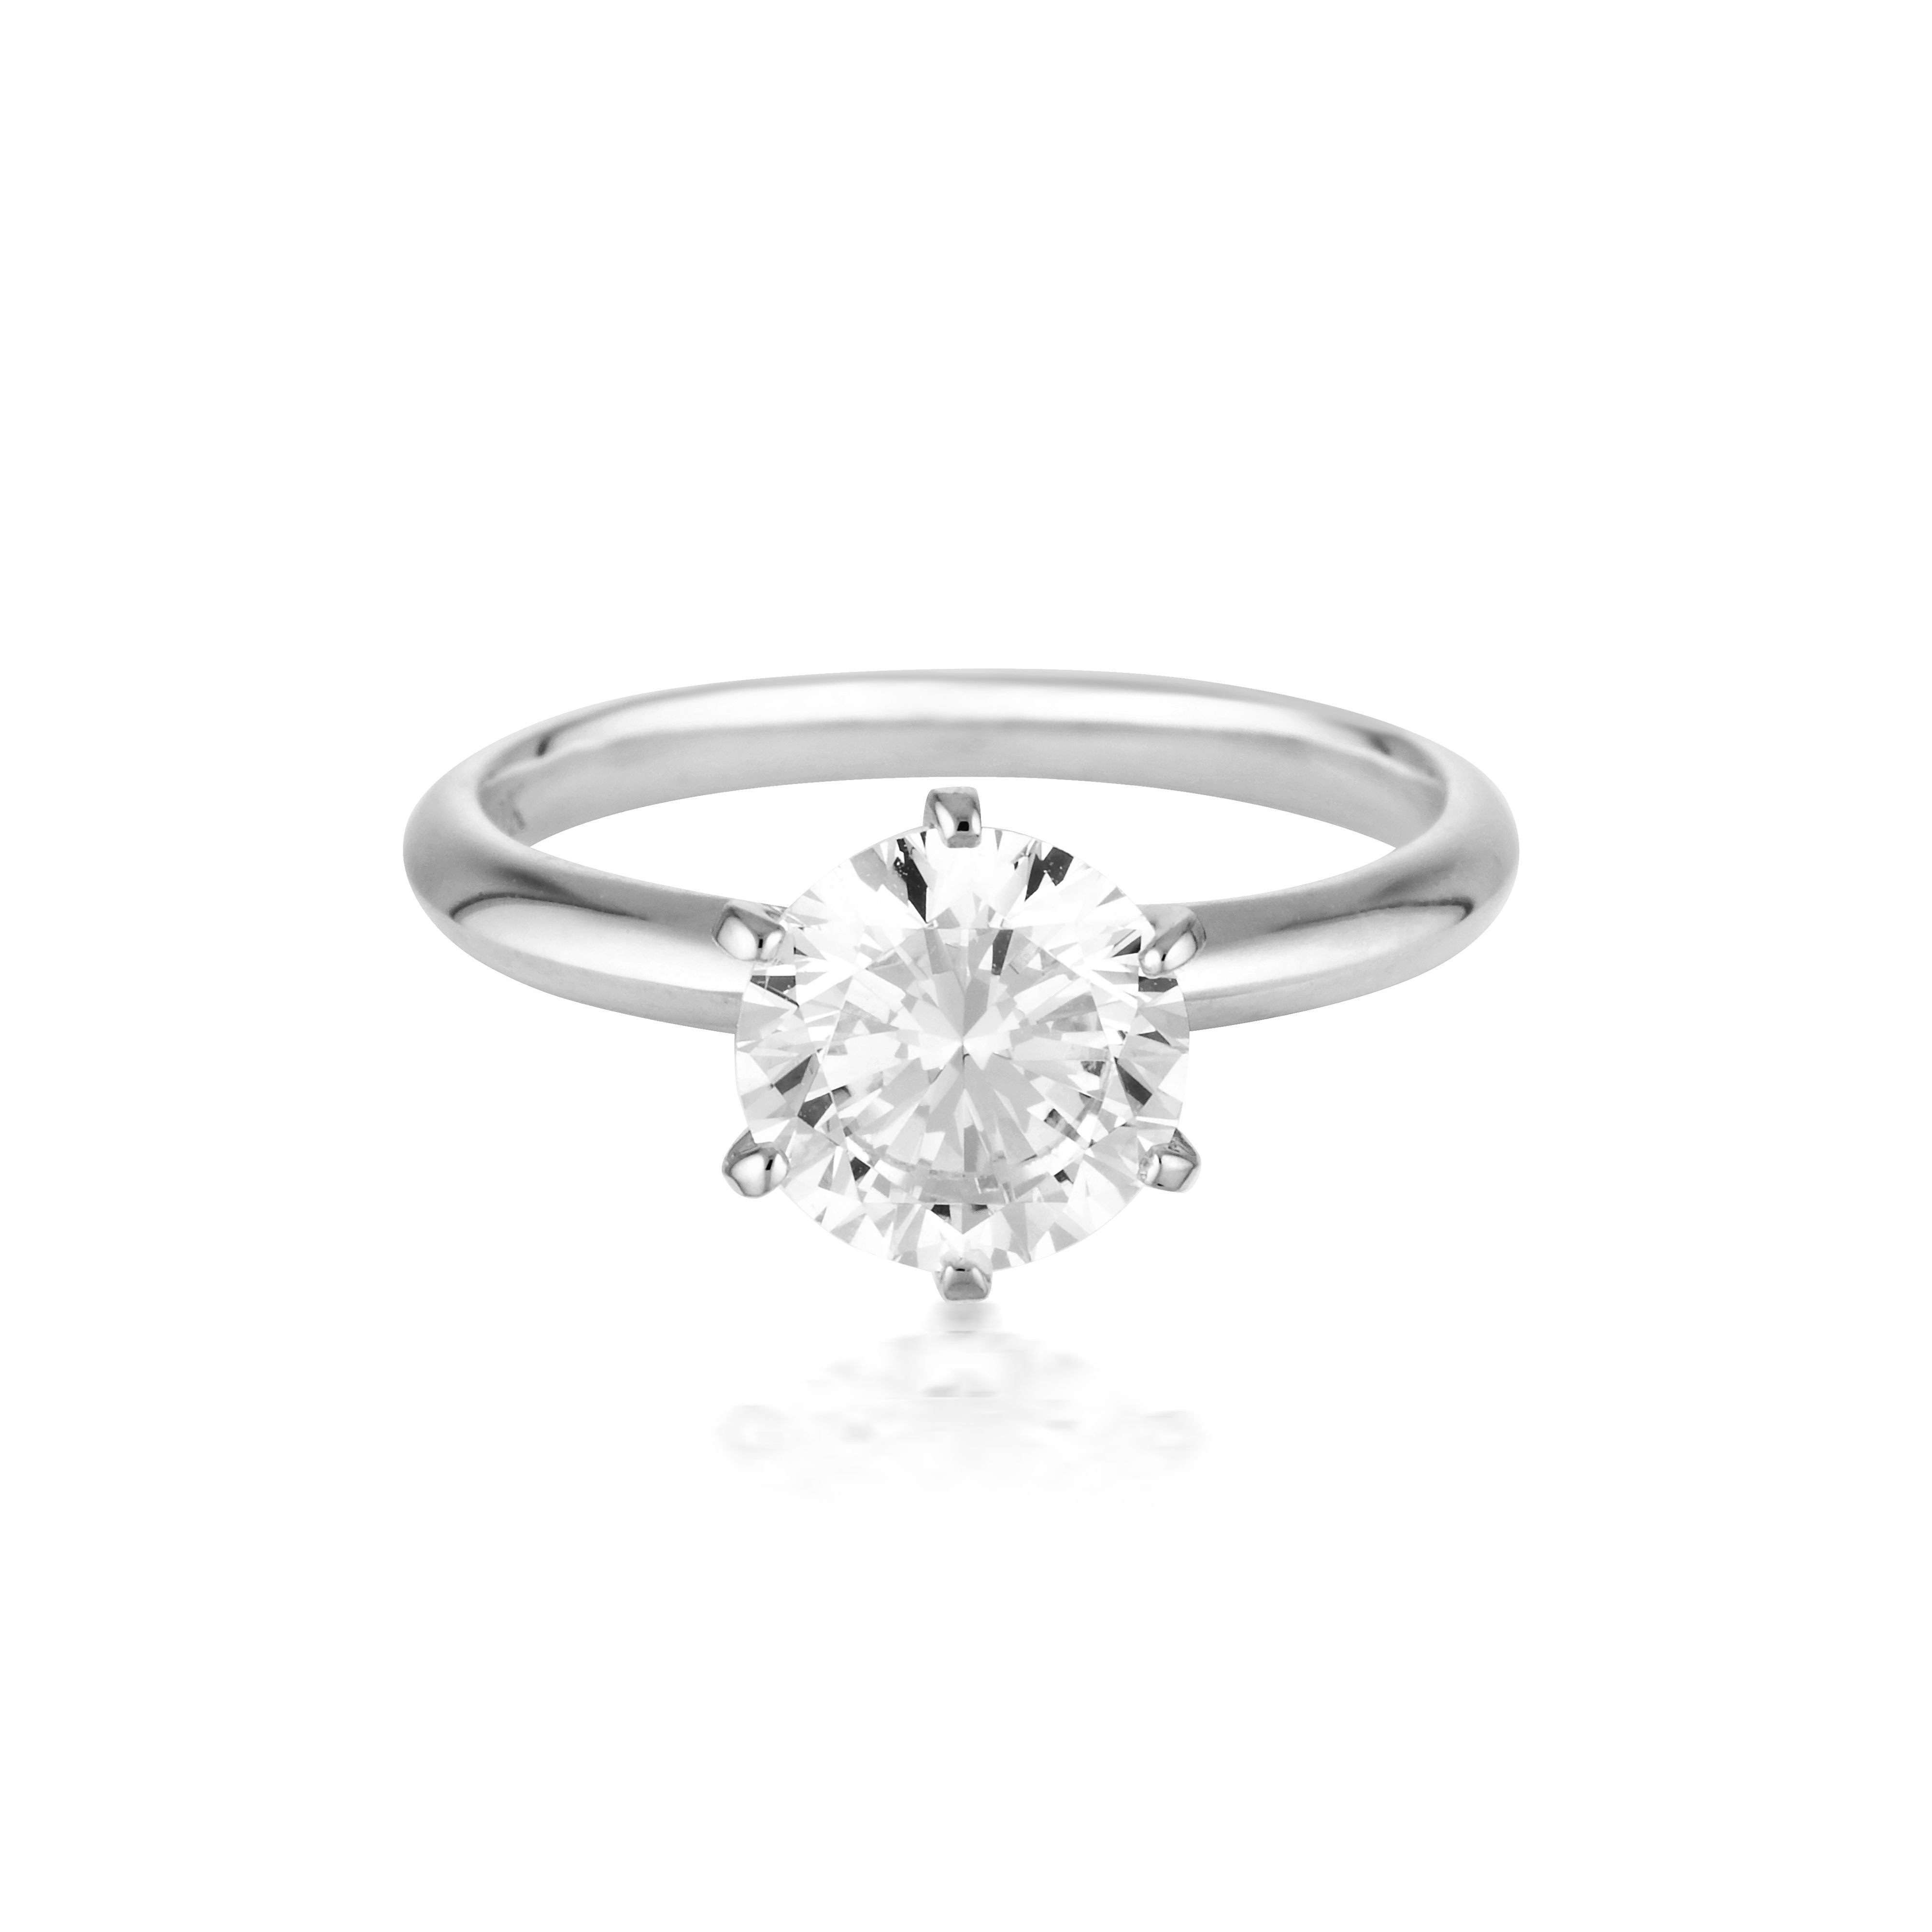 Georgini - Round Brilliant Cut 2Ct Cubic Zirconia Solitaire With Knife Edge Band In 9Ct White Gold